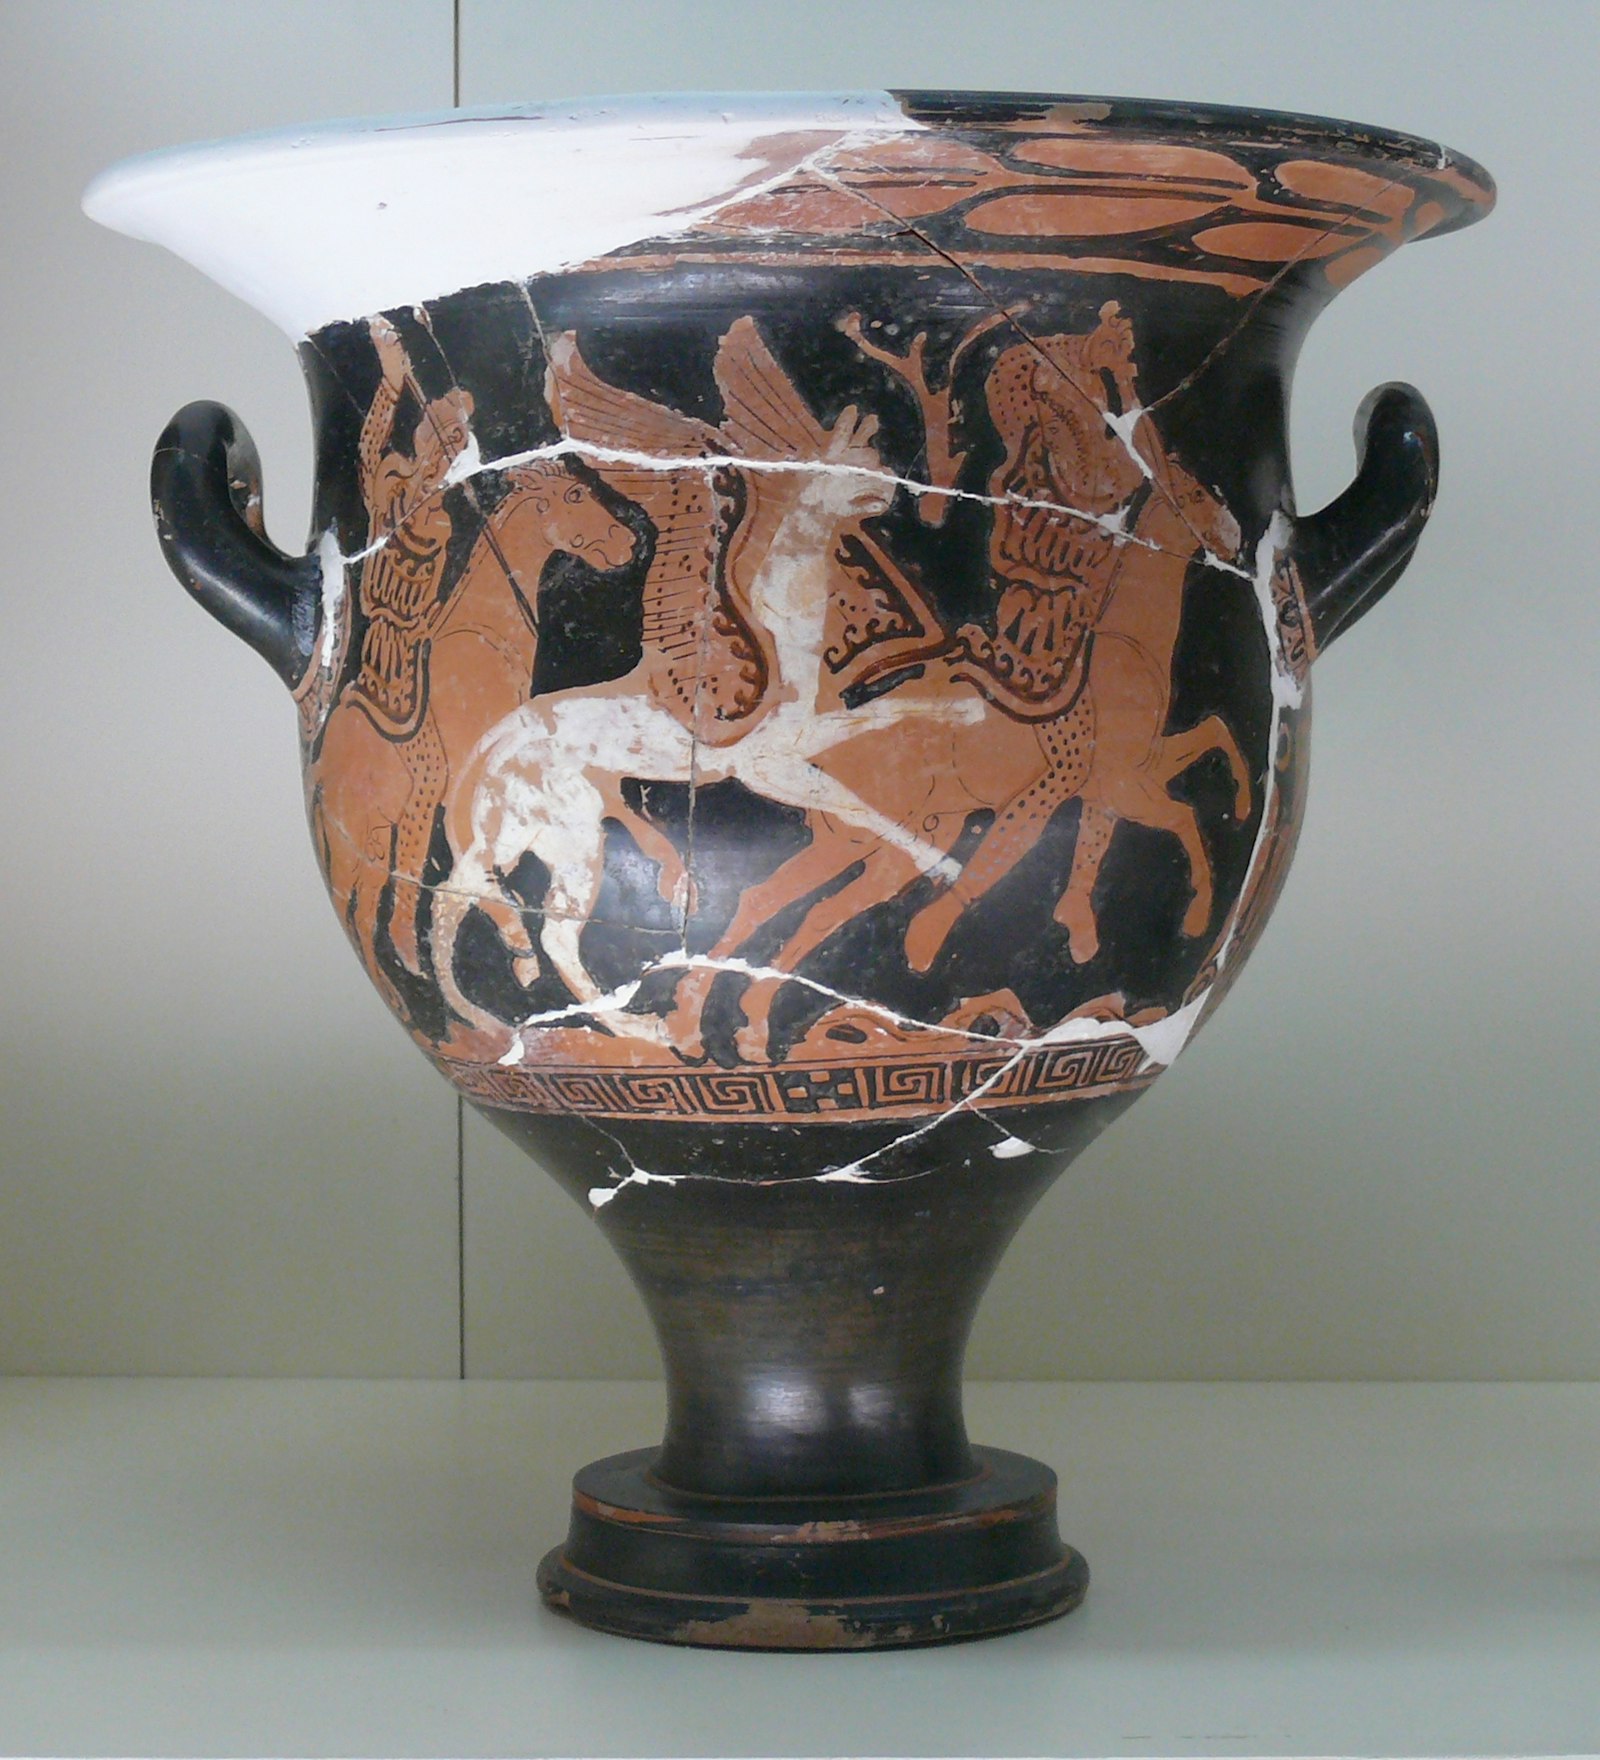 Griffin-Arimpasians bell krater, 5th or 4th century BCE